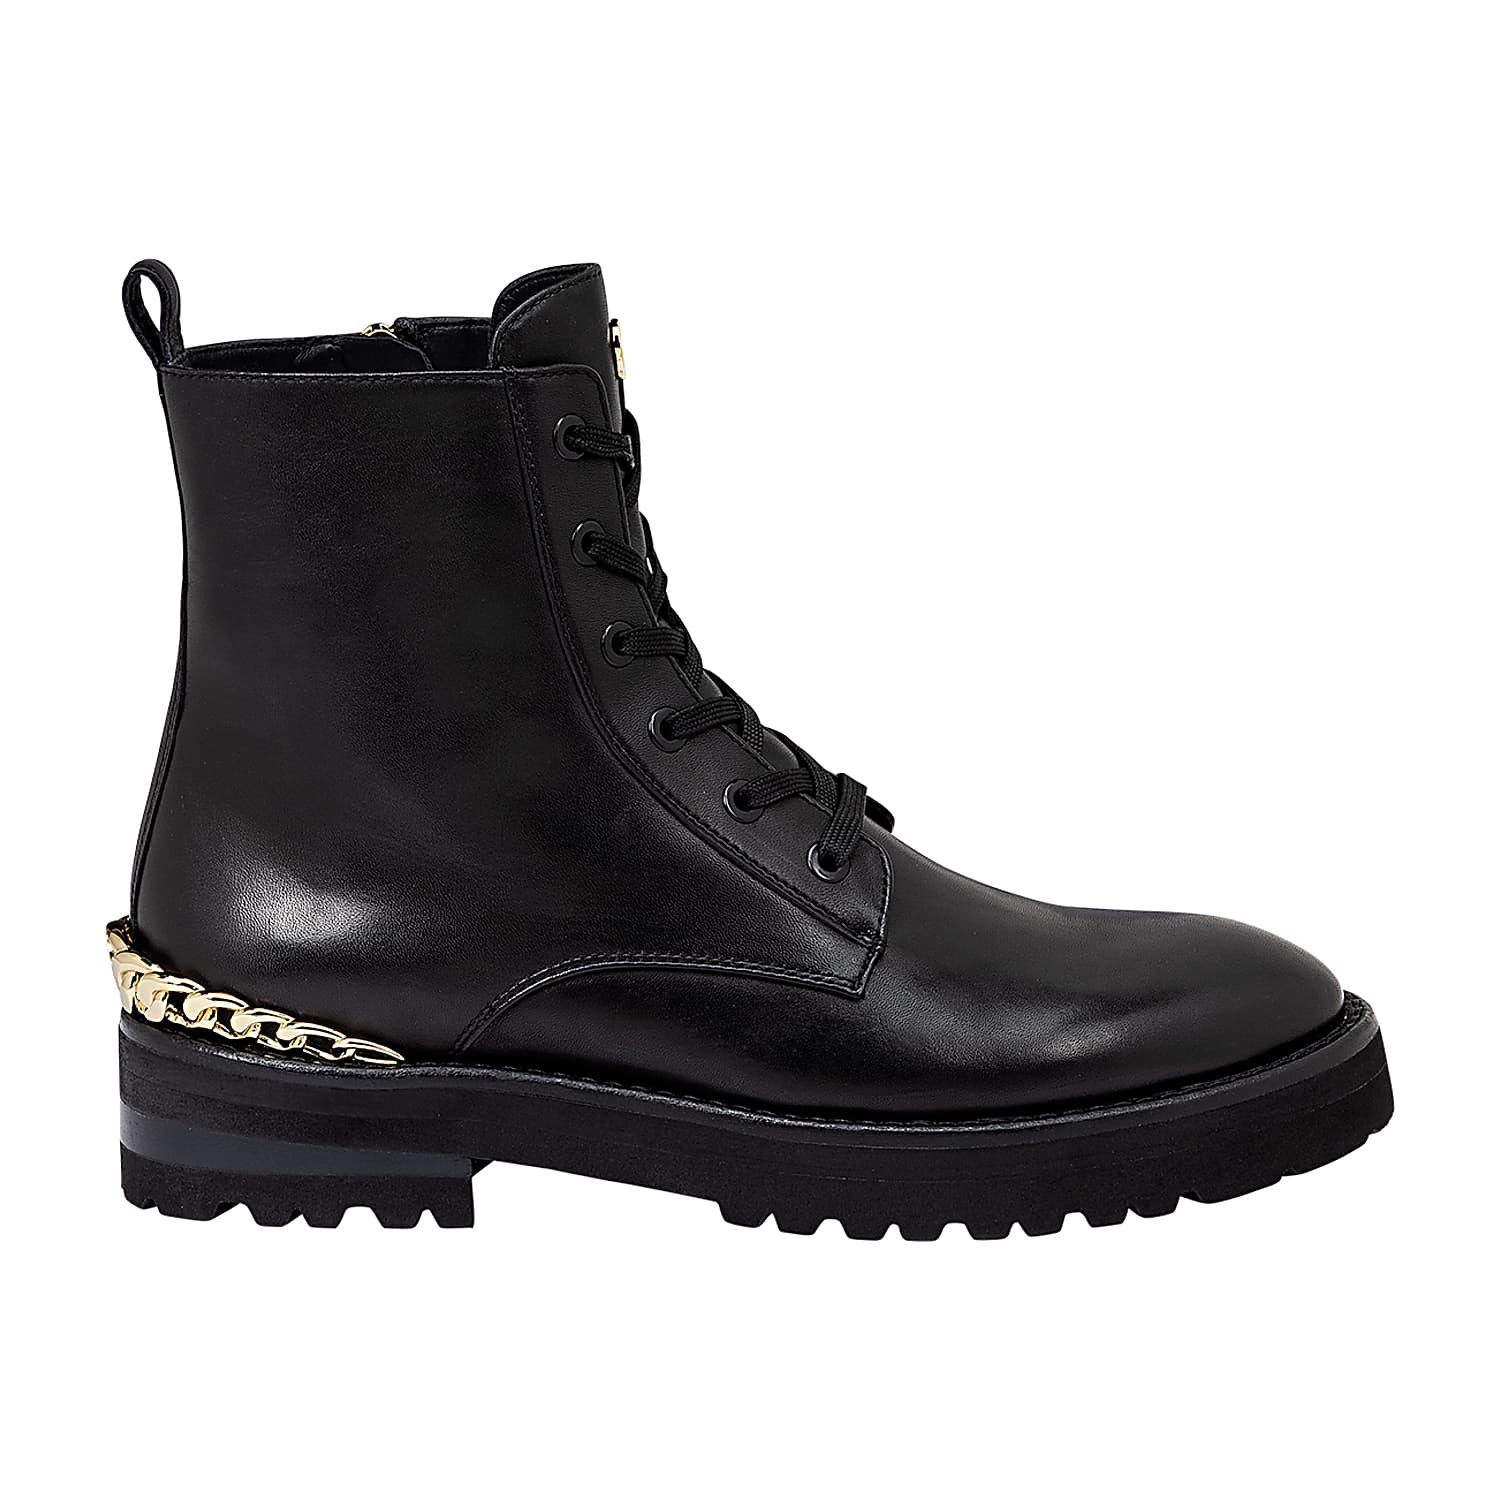 Ava boots with chain